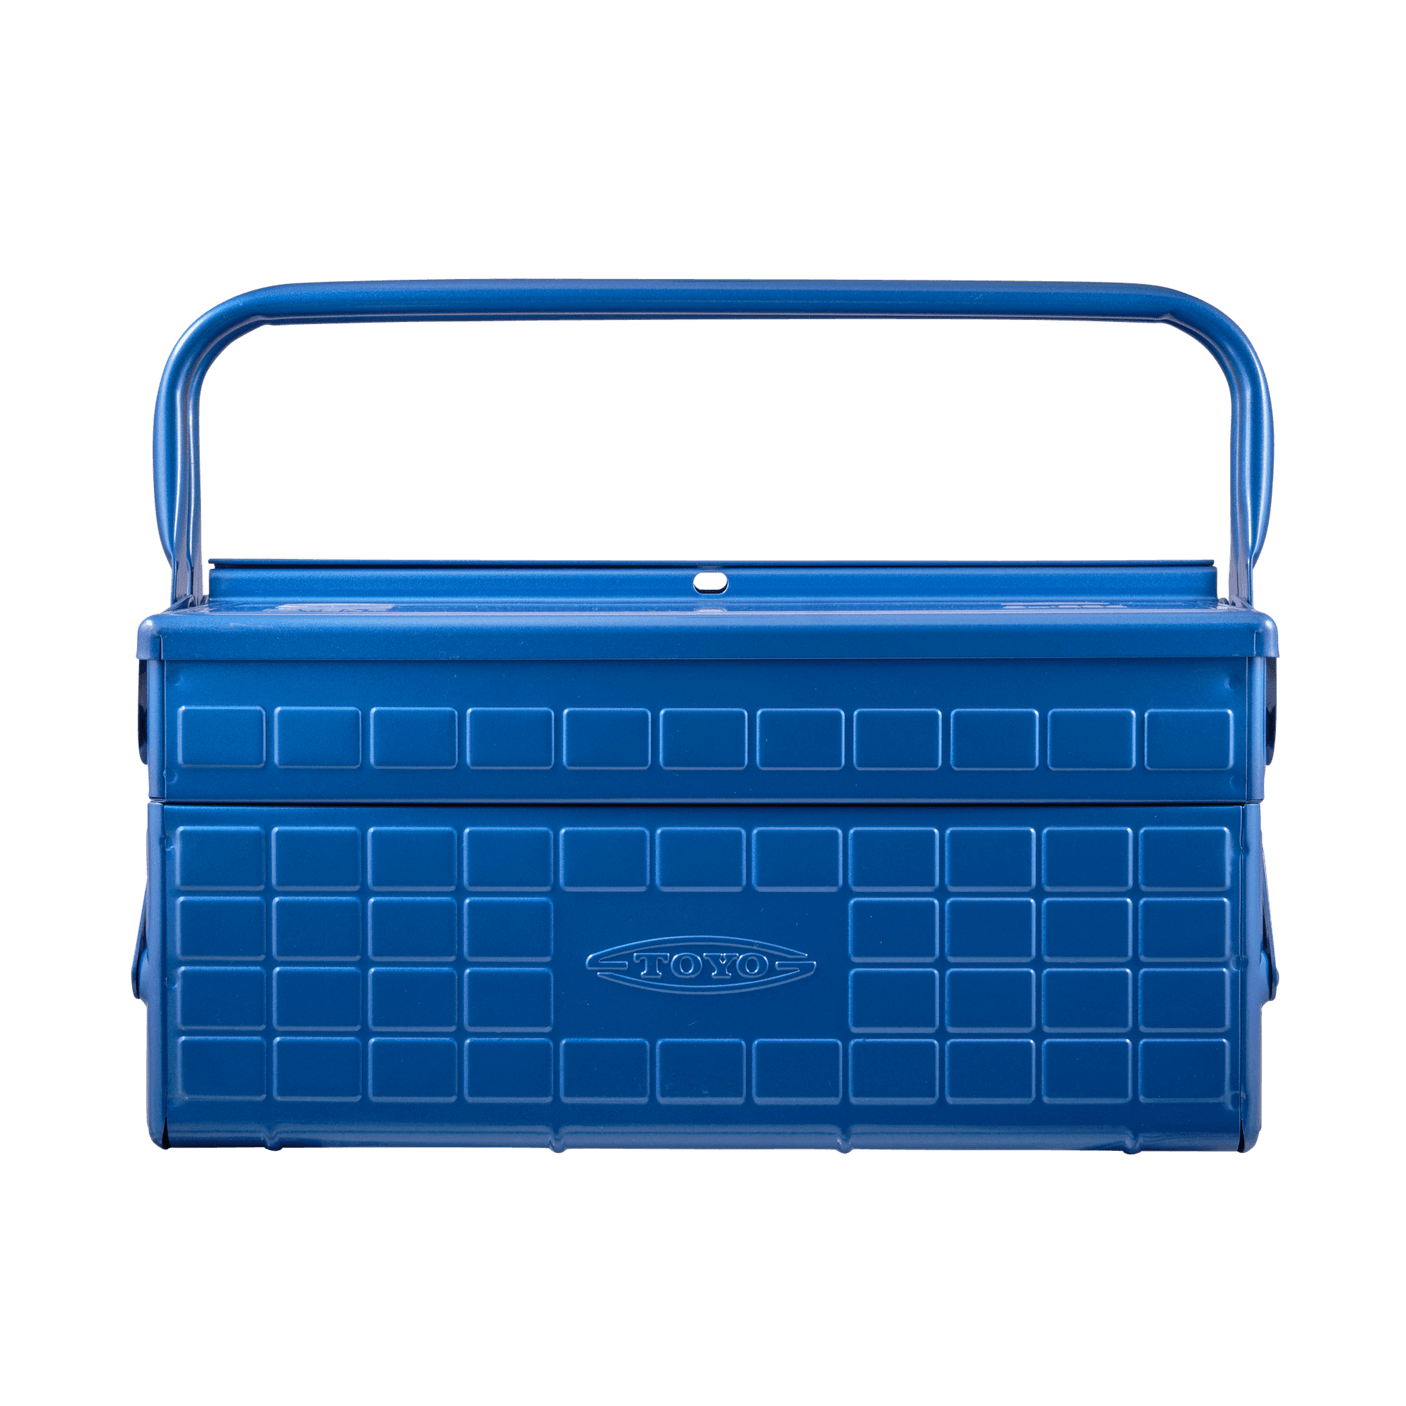 TOYO Cantilever Toolbox GL-350 B (Blue) - Tool Bags Boxes and Rolls - Japanese Tools Australia